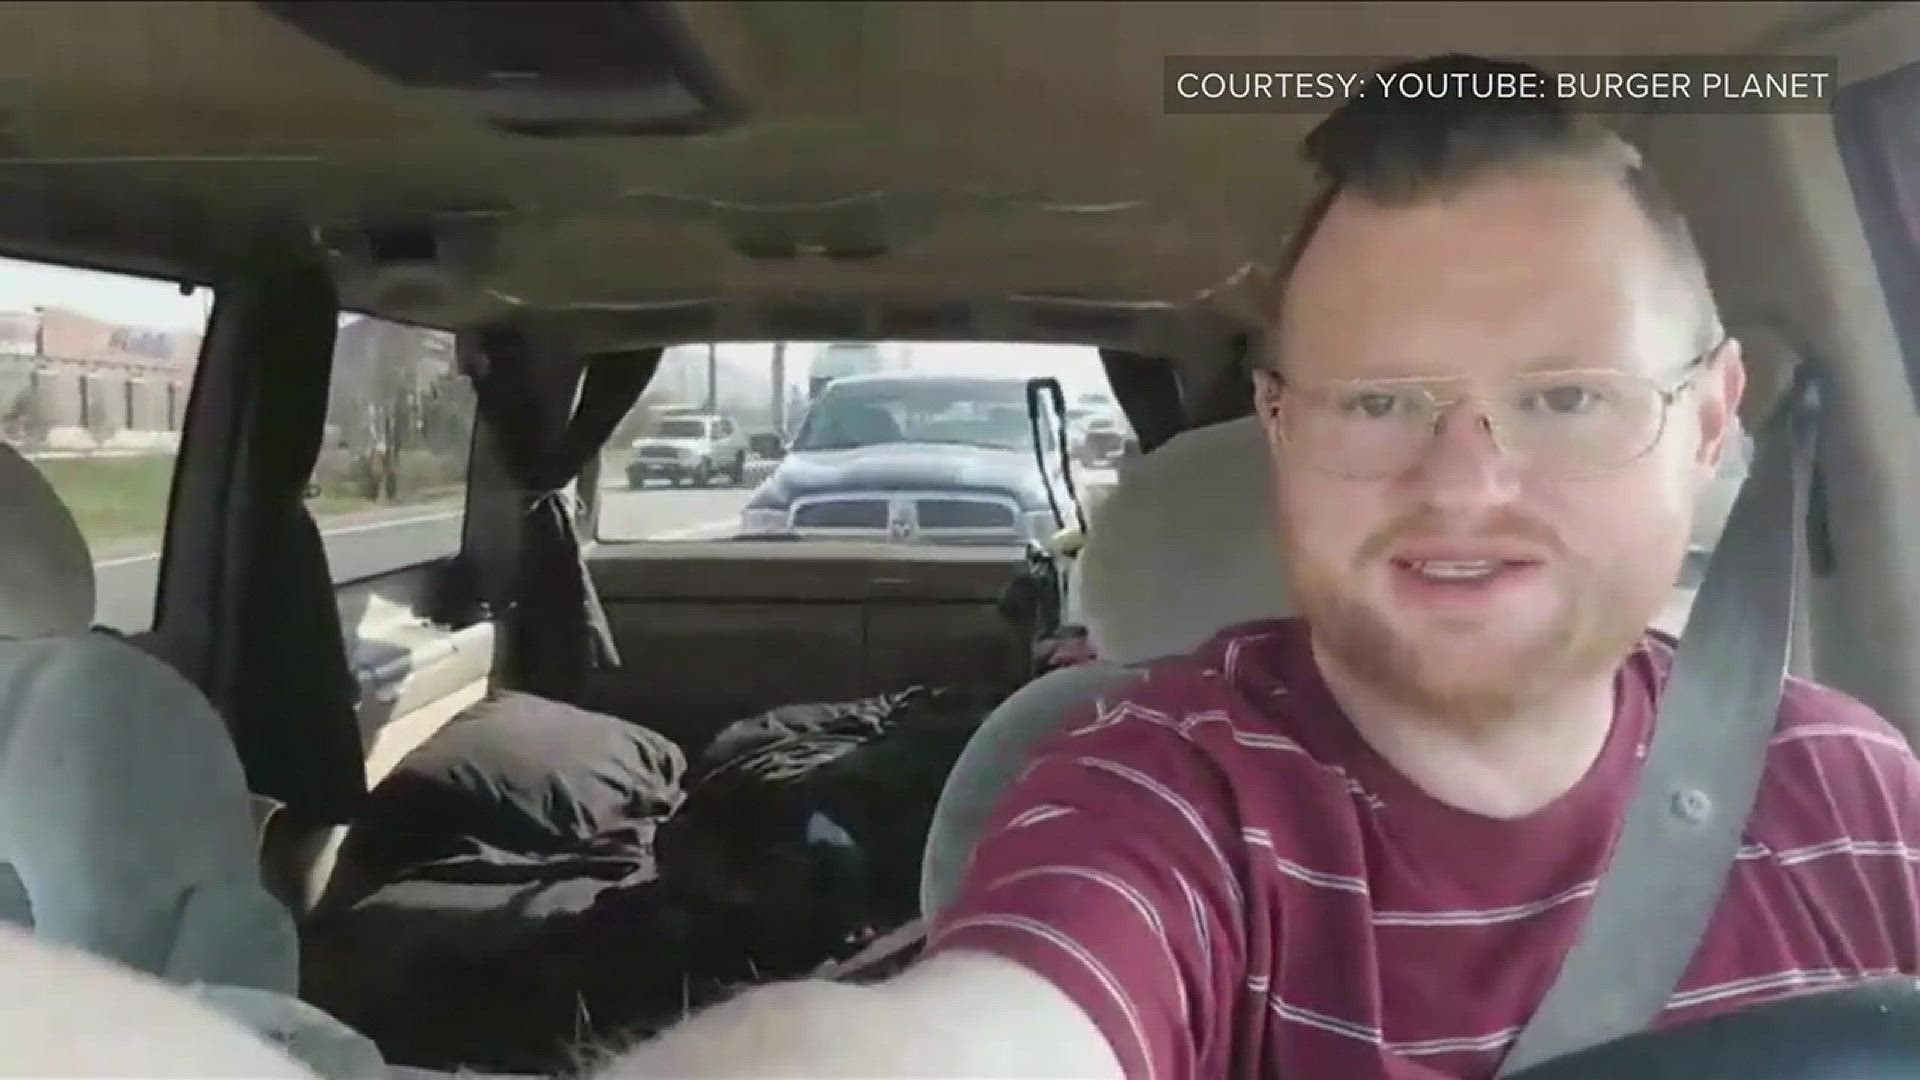 Moments before Thursday's fiery crash on Interstate 70, Josh McCutchen was live streaming on YouTube while driving when a truck flew past him. Soon after, he came across flames and smoke.